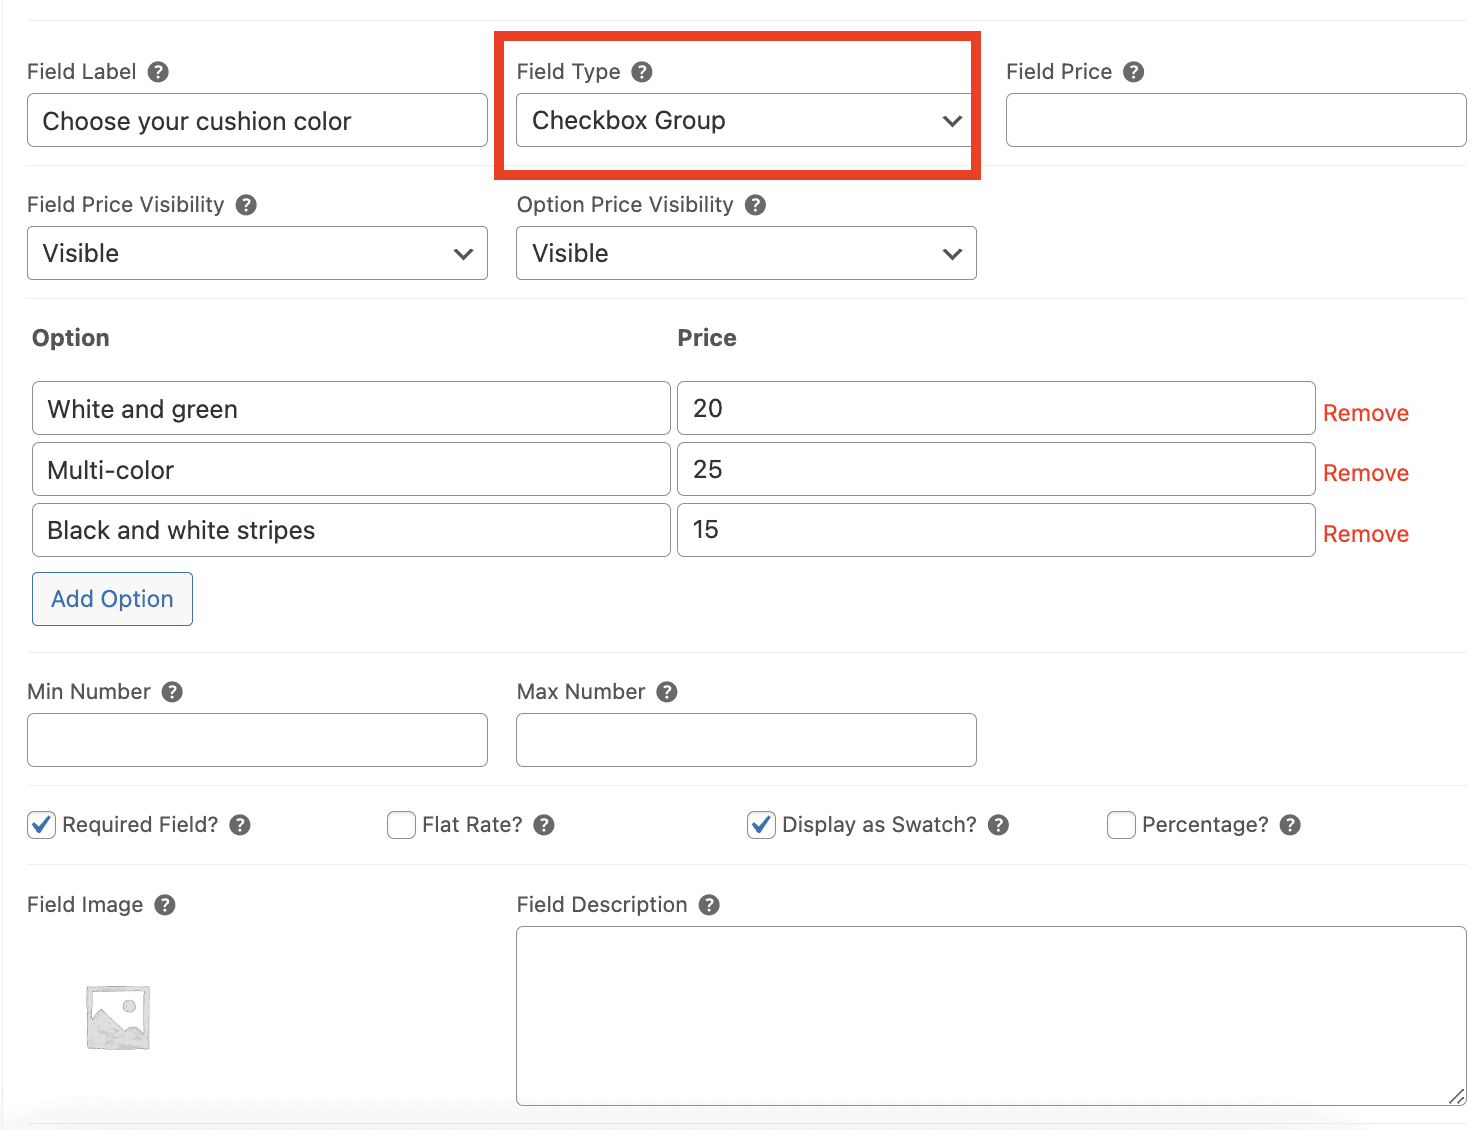 Checkbox Group field type configuration settings